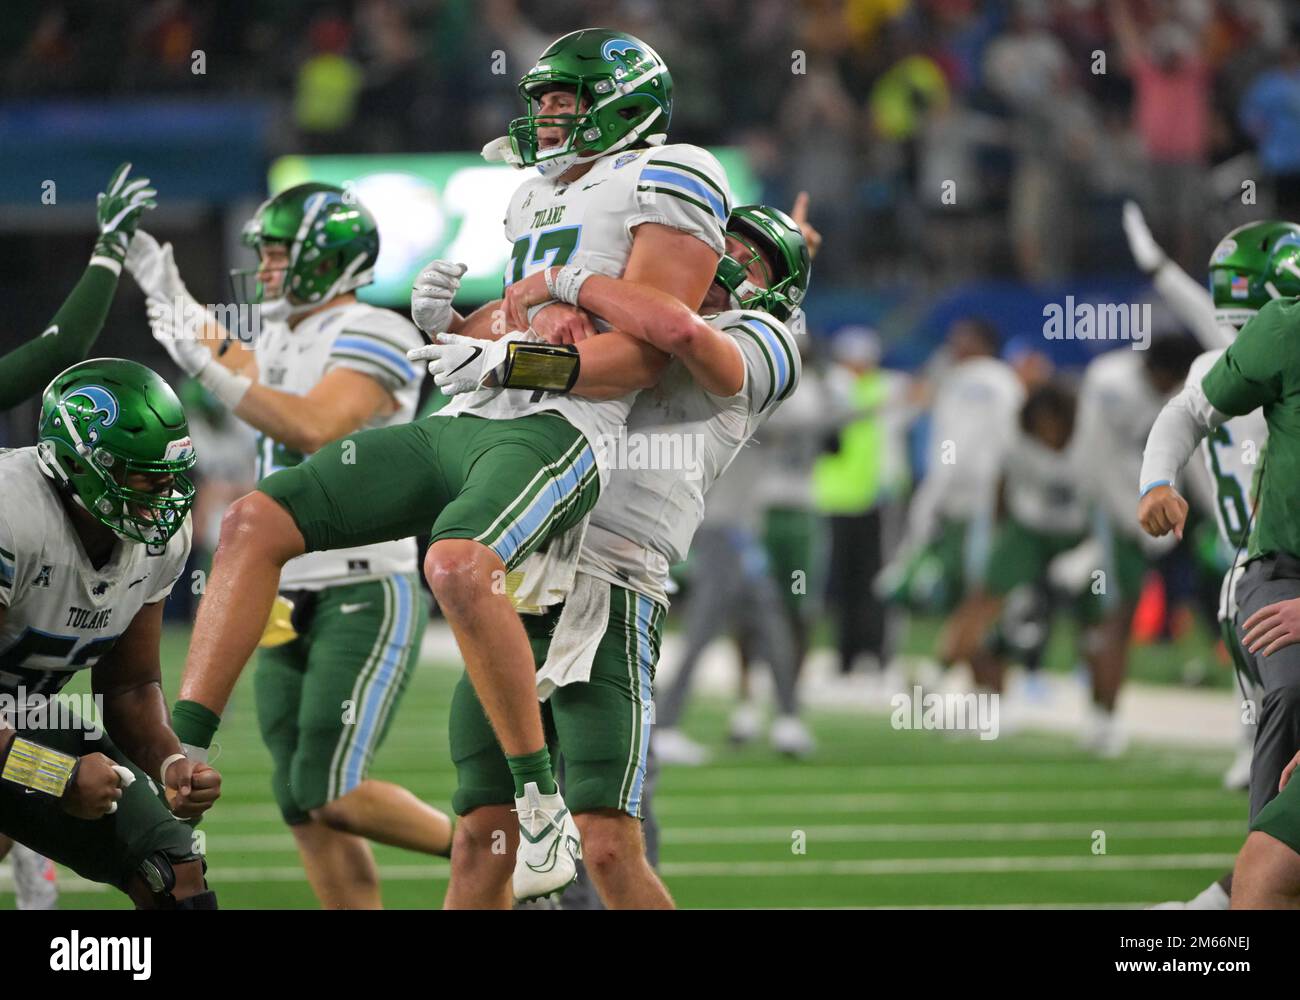 Arlington, Texas, USA. 2nd Jan, 2023. Tulane Green Wave quarterback Michael Pratt (7) and Tulane Green Wave tight end Alex Bauman (87) celebrate a touchdown after review during the 2nd half of the NCAA Football game between the Tulane Green Wave and the USC Trojans at AT&T Stadium in Arlington, Texas. Matthew Lynch/CSM/Alamy Live News Stock Photo